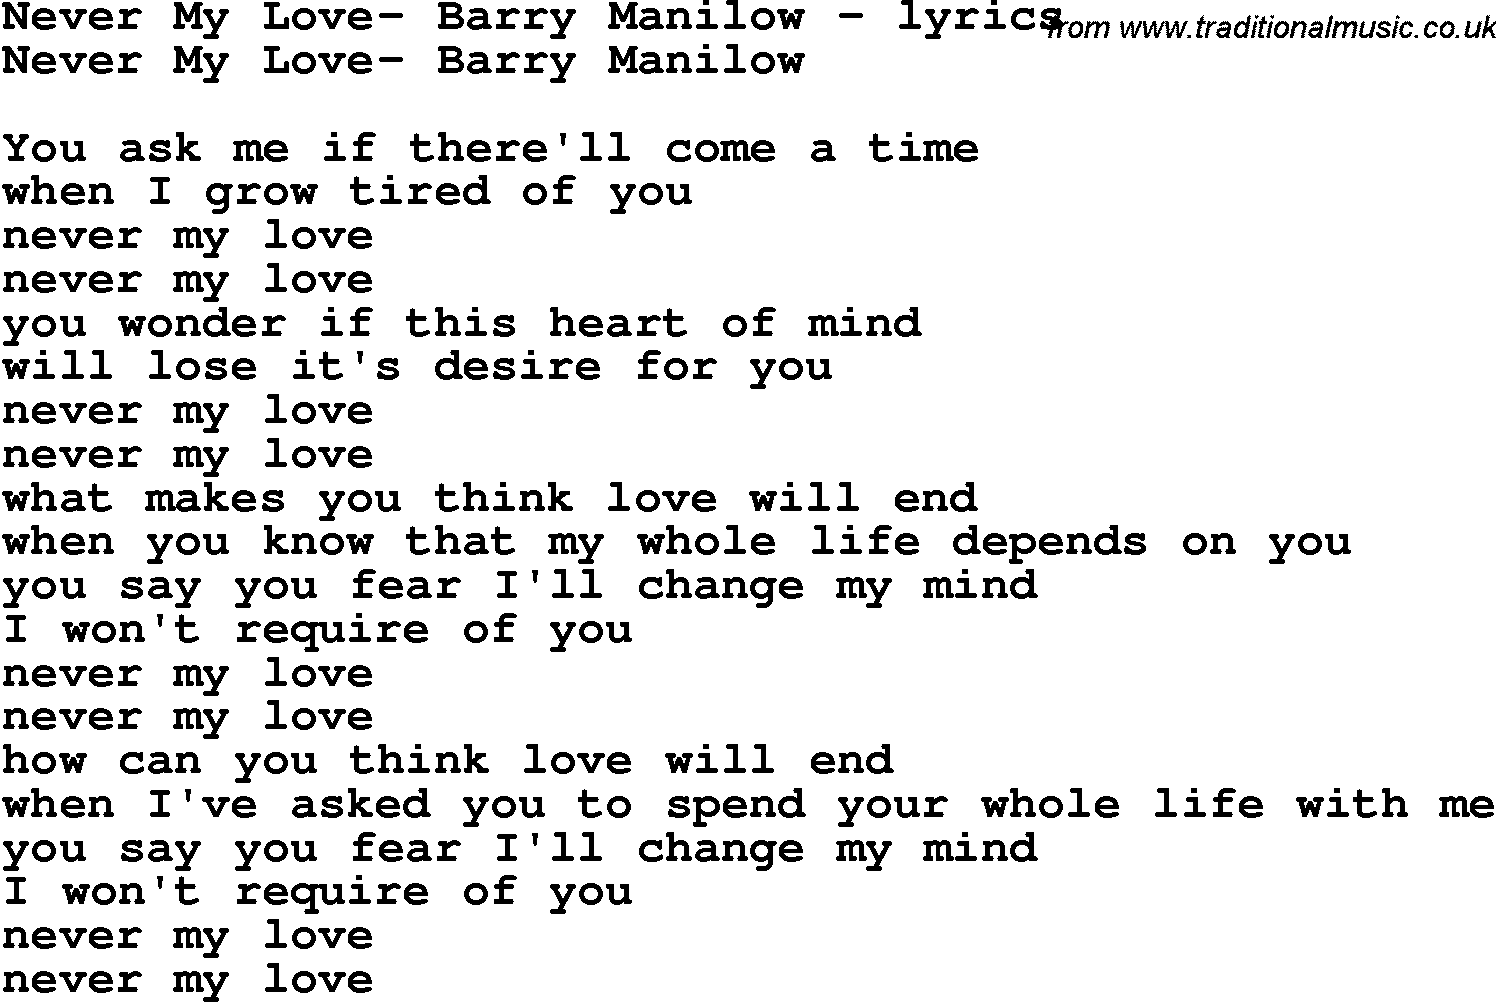 Love Song Lyrics for: Never My Love- Barry Manilow